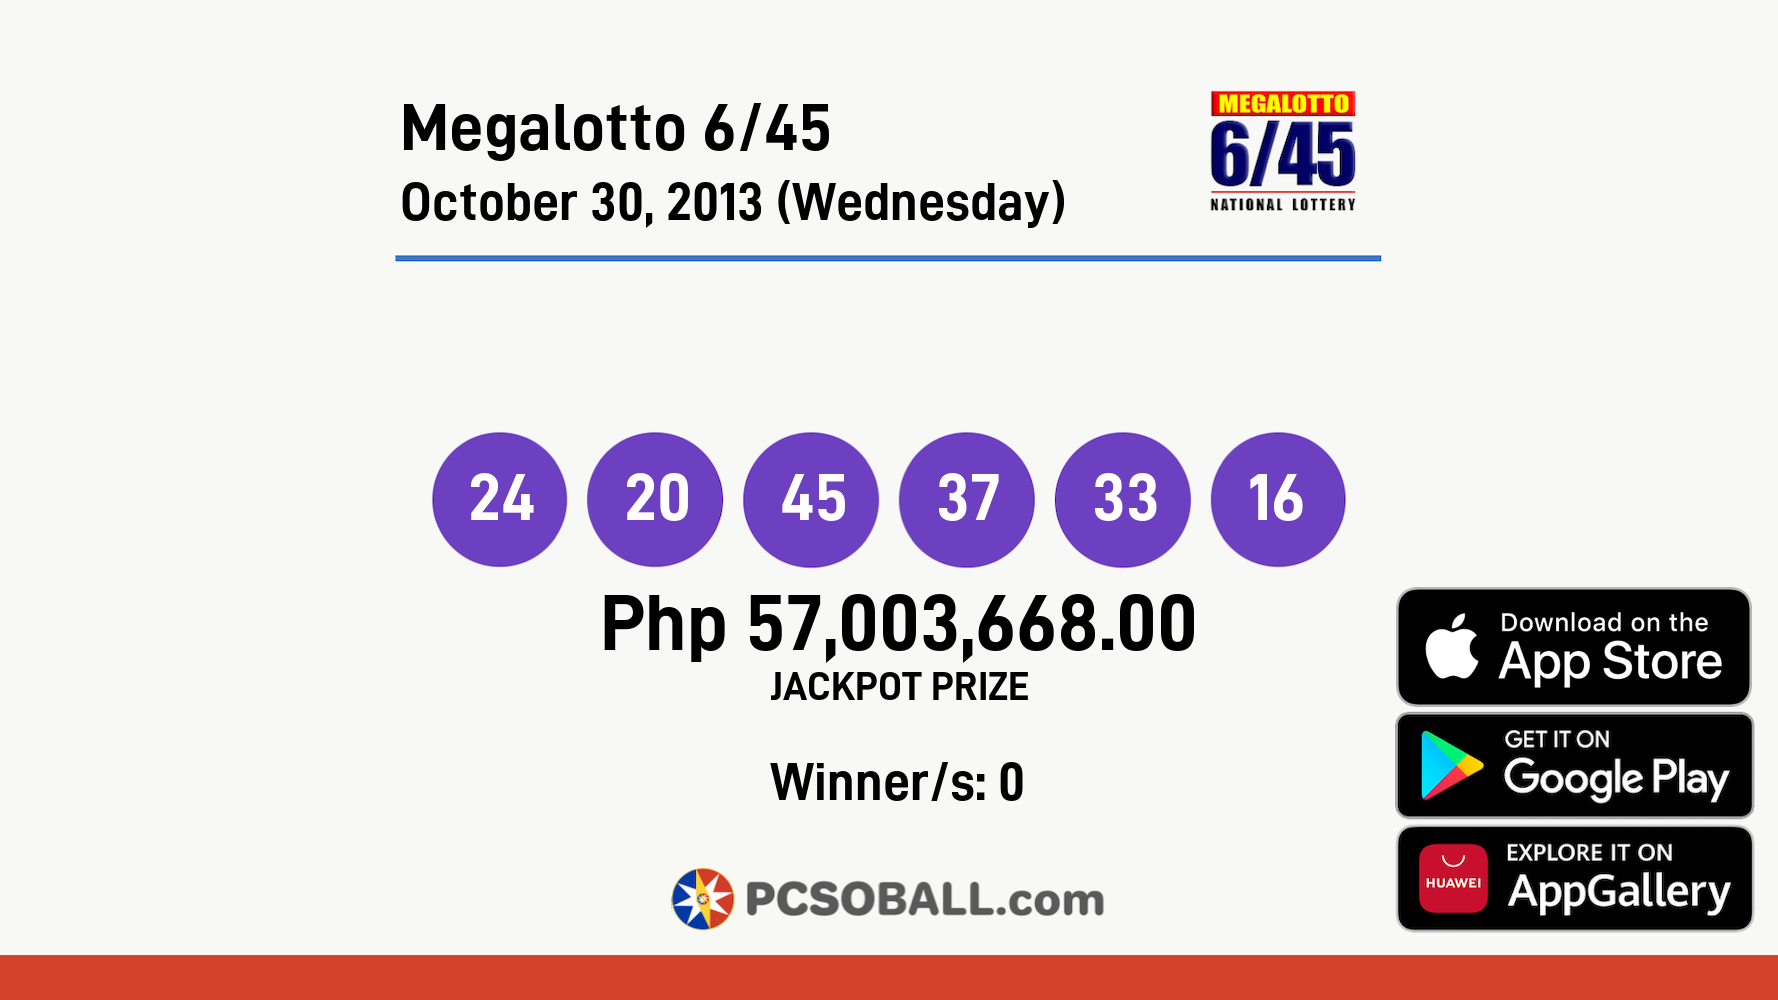 Megalotto 6/45 October 30, 2013 (Wednesday) Result